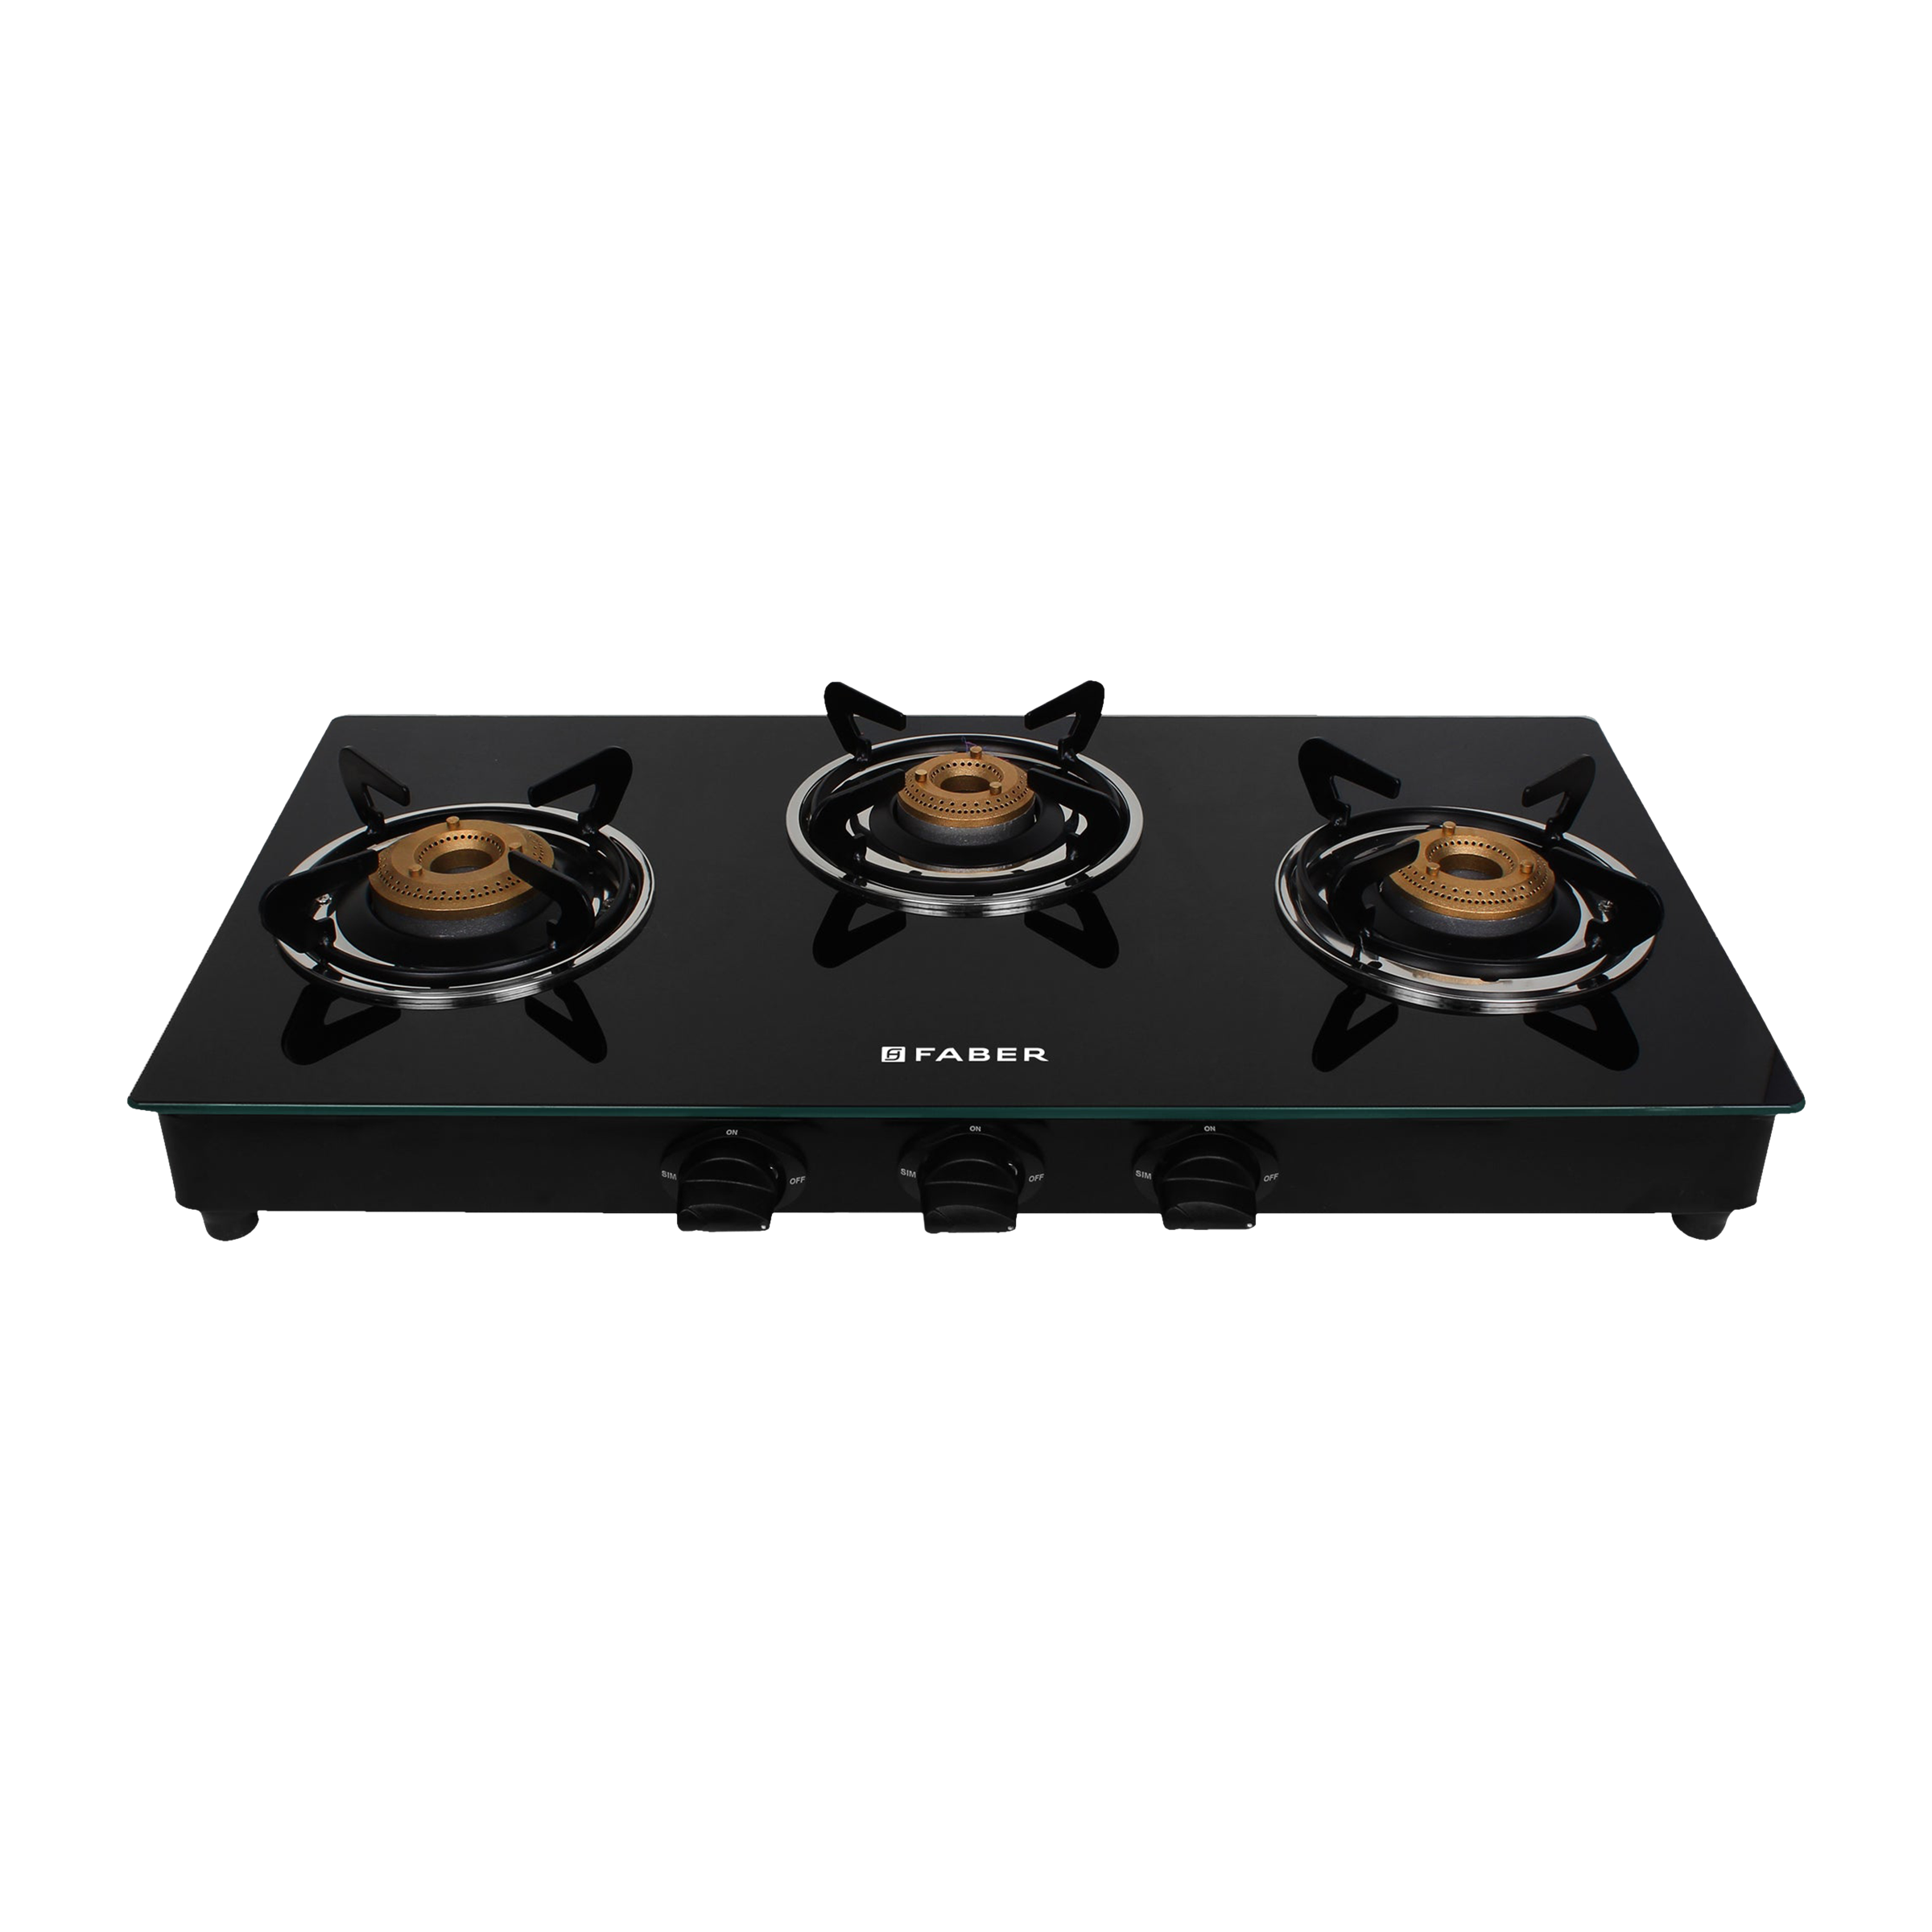 Faber Daisy 3 Burner Tempered Glass Gas Stove (Easy To Clean, 106.0683.363, Black)_4